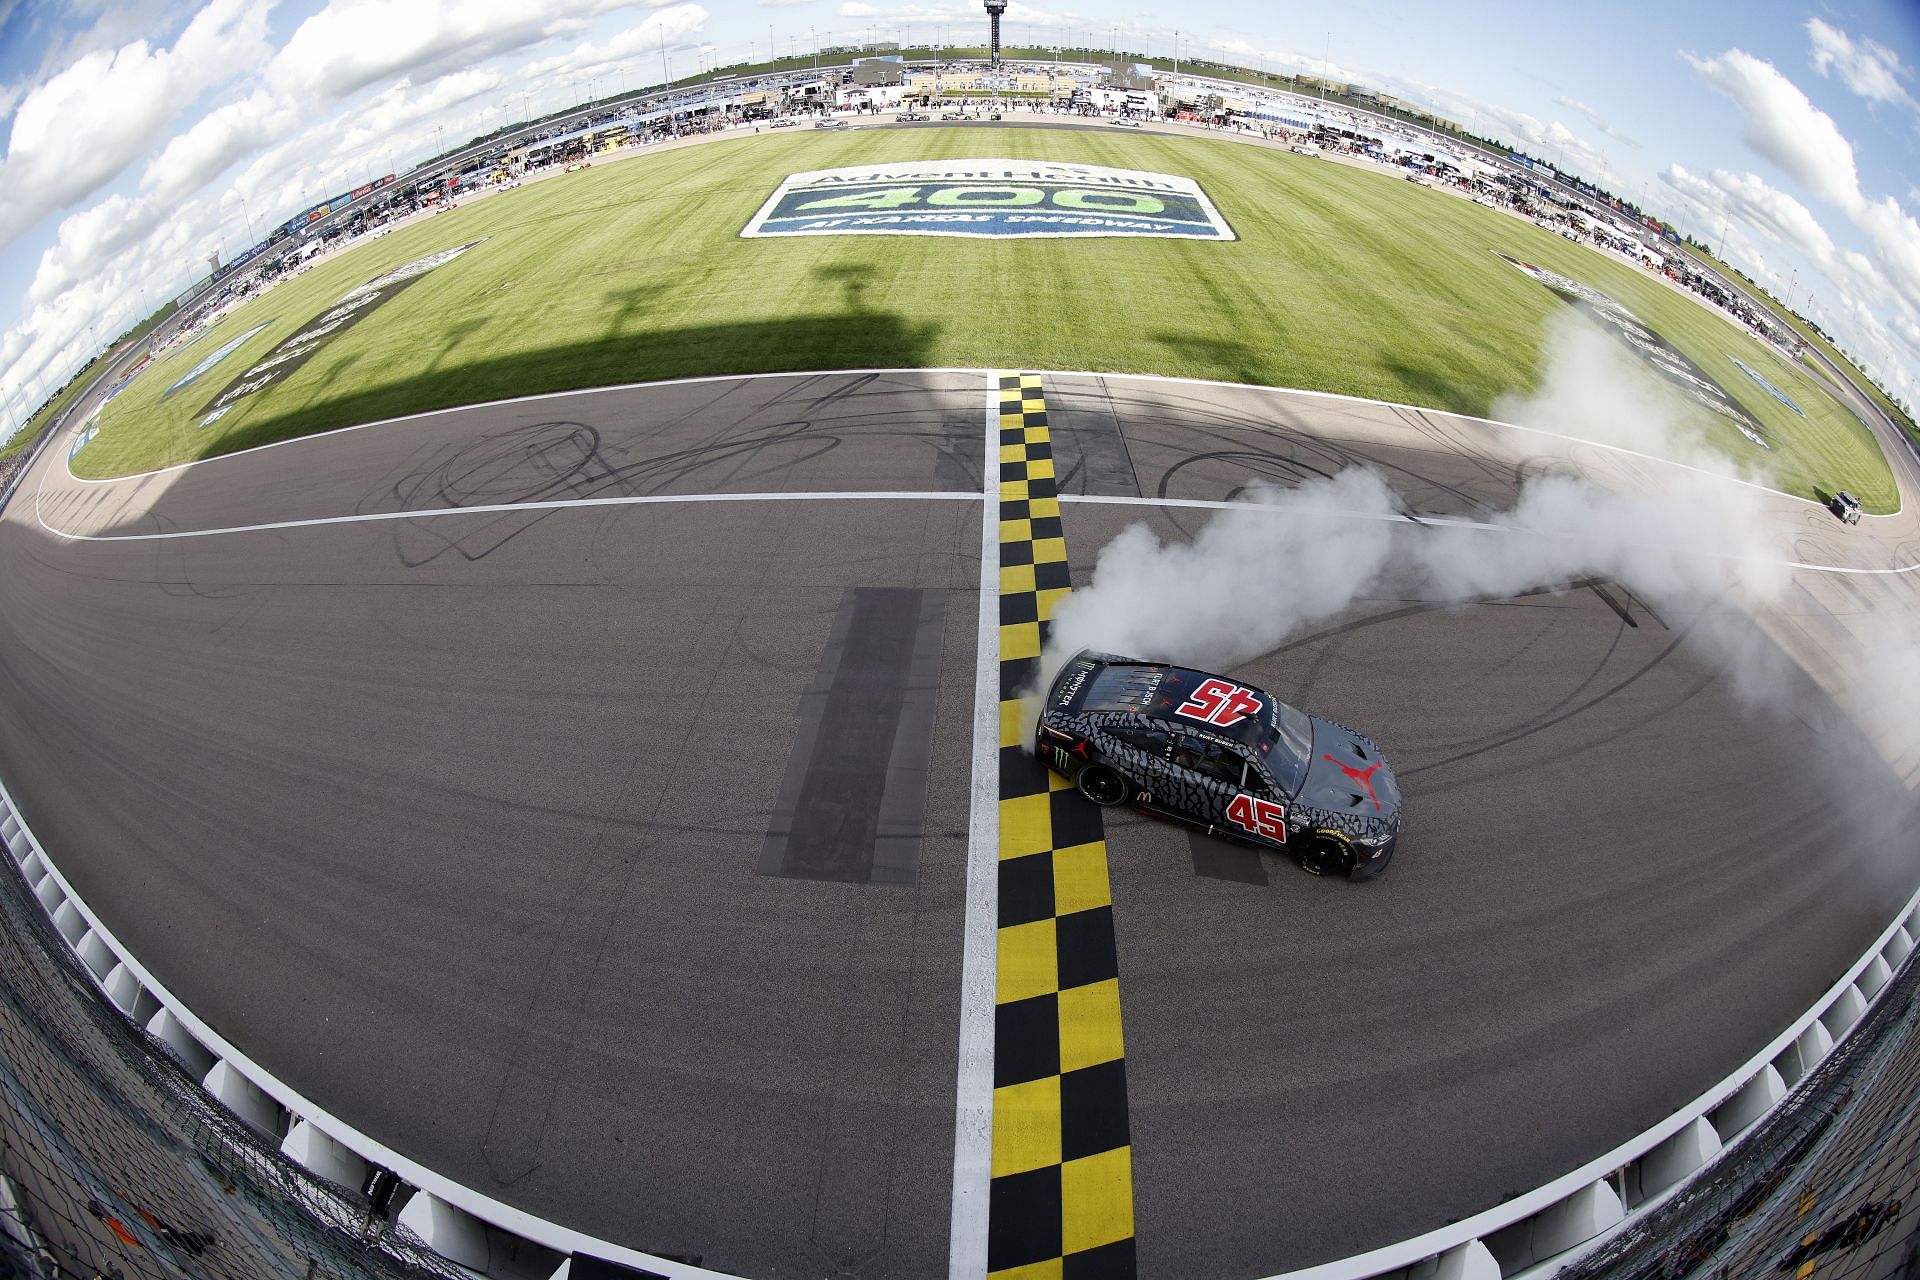 Kurt Busch celebrates with a burnout after winning the NASCAR Cup Series AdventHealth 400 at Kansas Speedway (Photo by Sean Gardner/Getty Images)